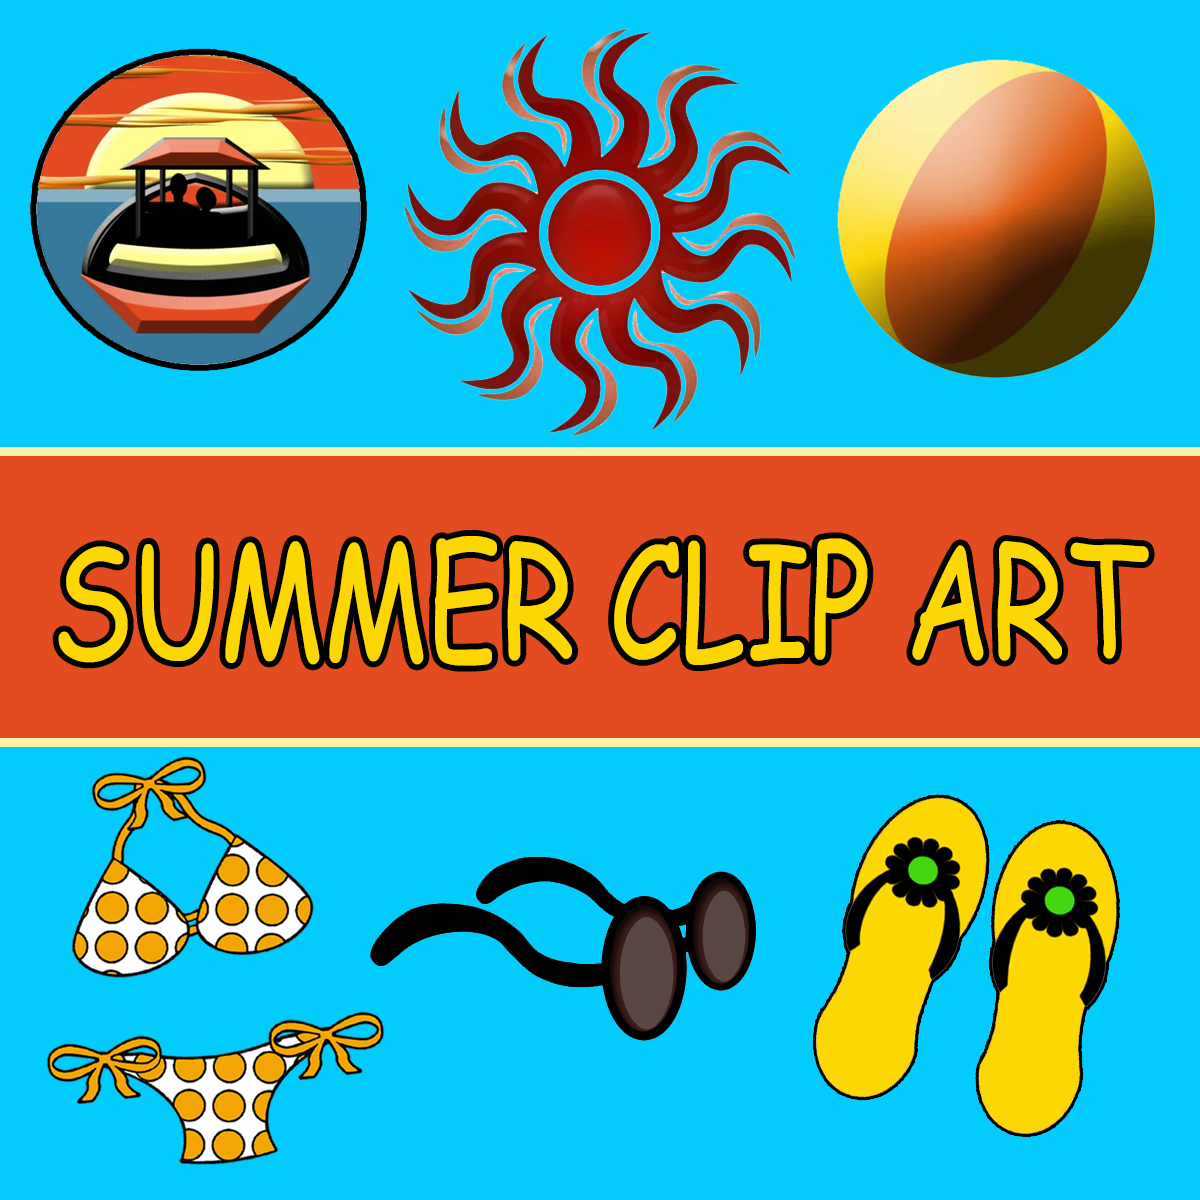 Free Summer Clip Art Images - Suns, Sunsets, Beach & More!